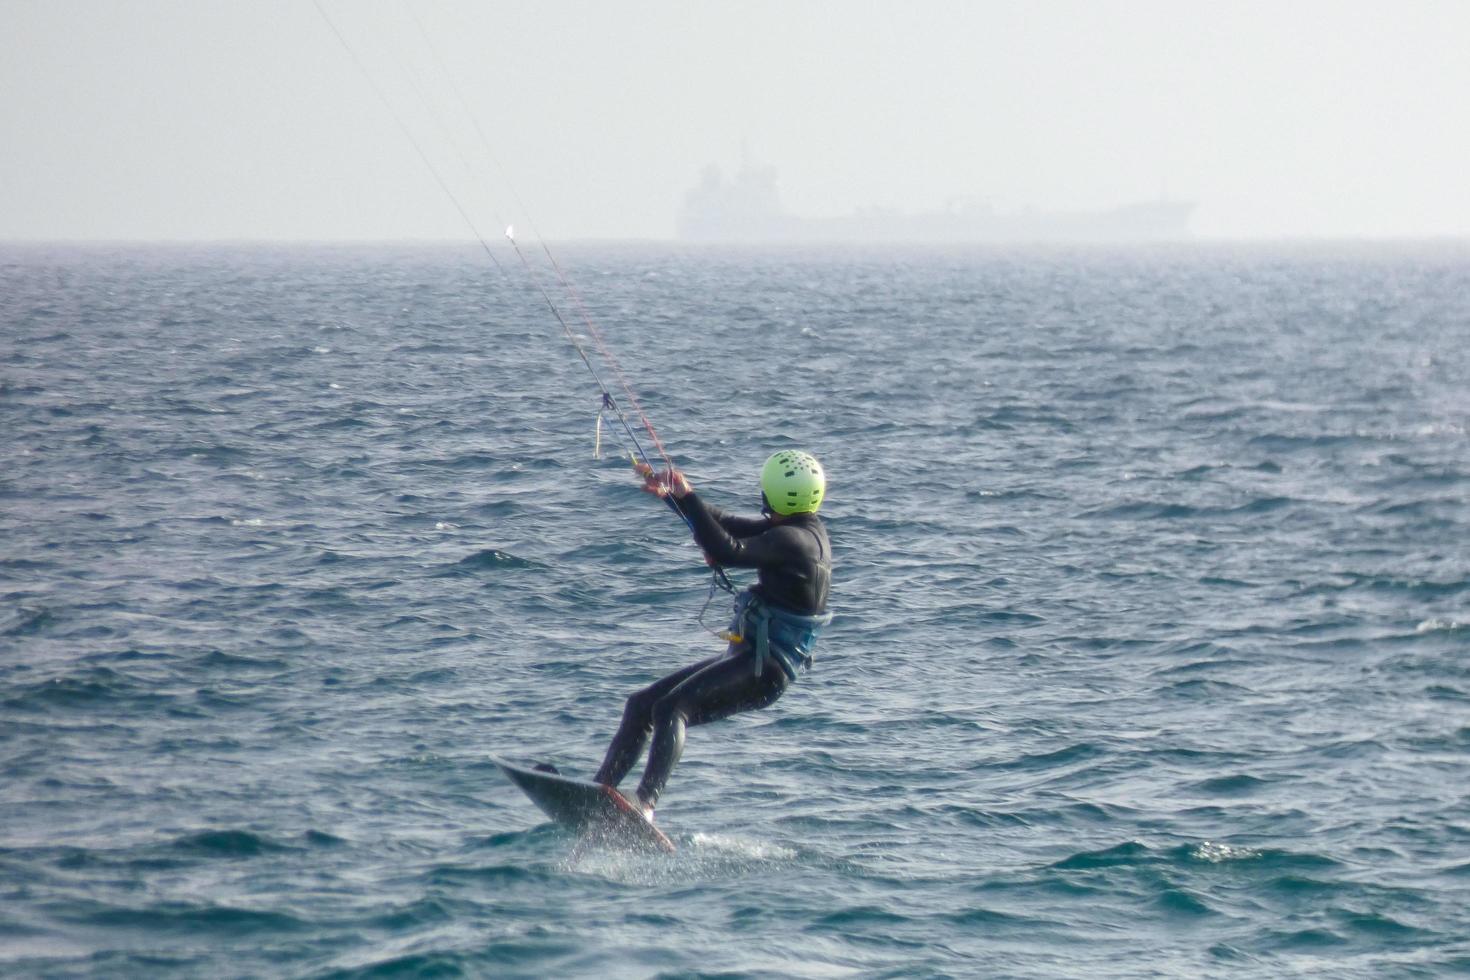 windsurfing, kitesurfing, water and wind sports powered by sails or kites photo